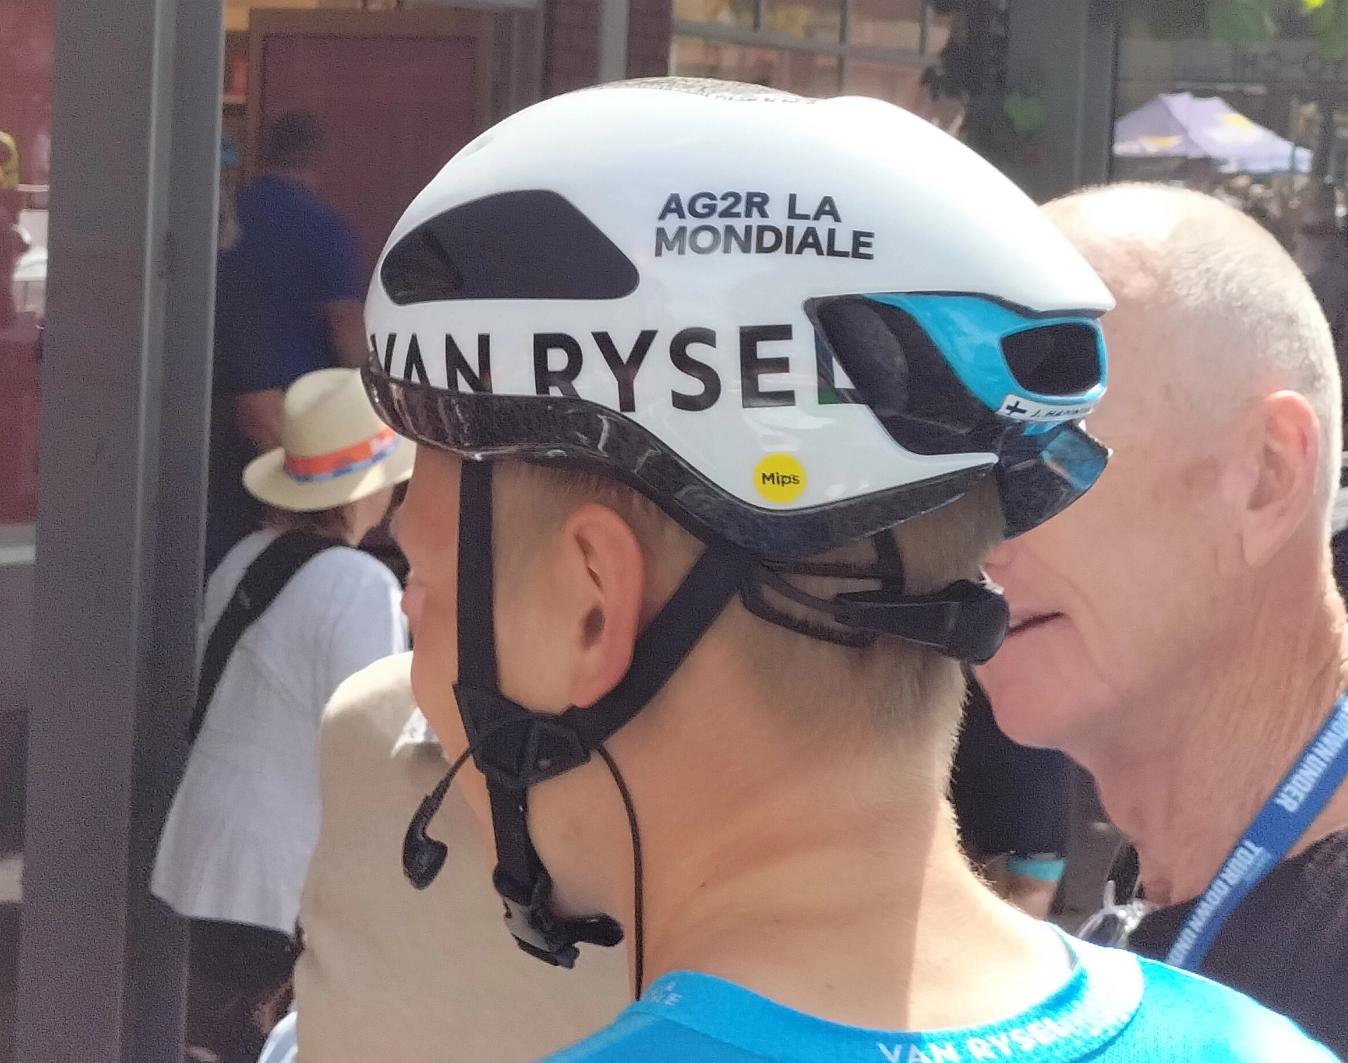 AG2R will use Van Rysel accessories in 2024